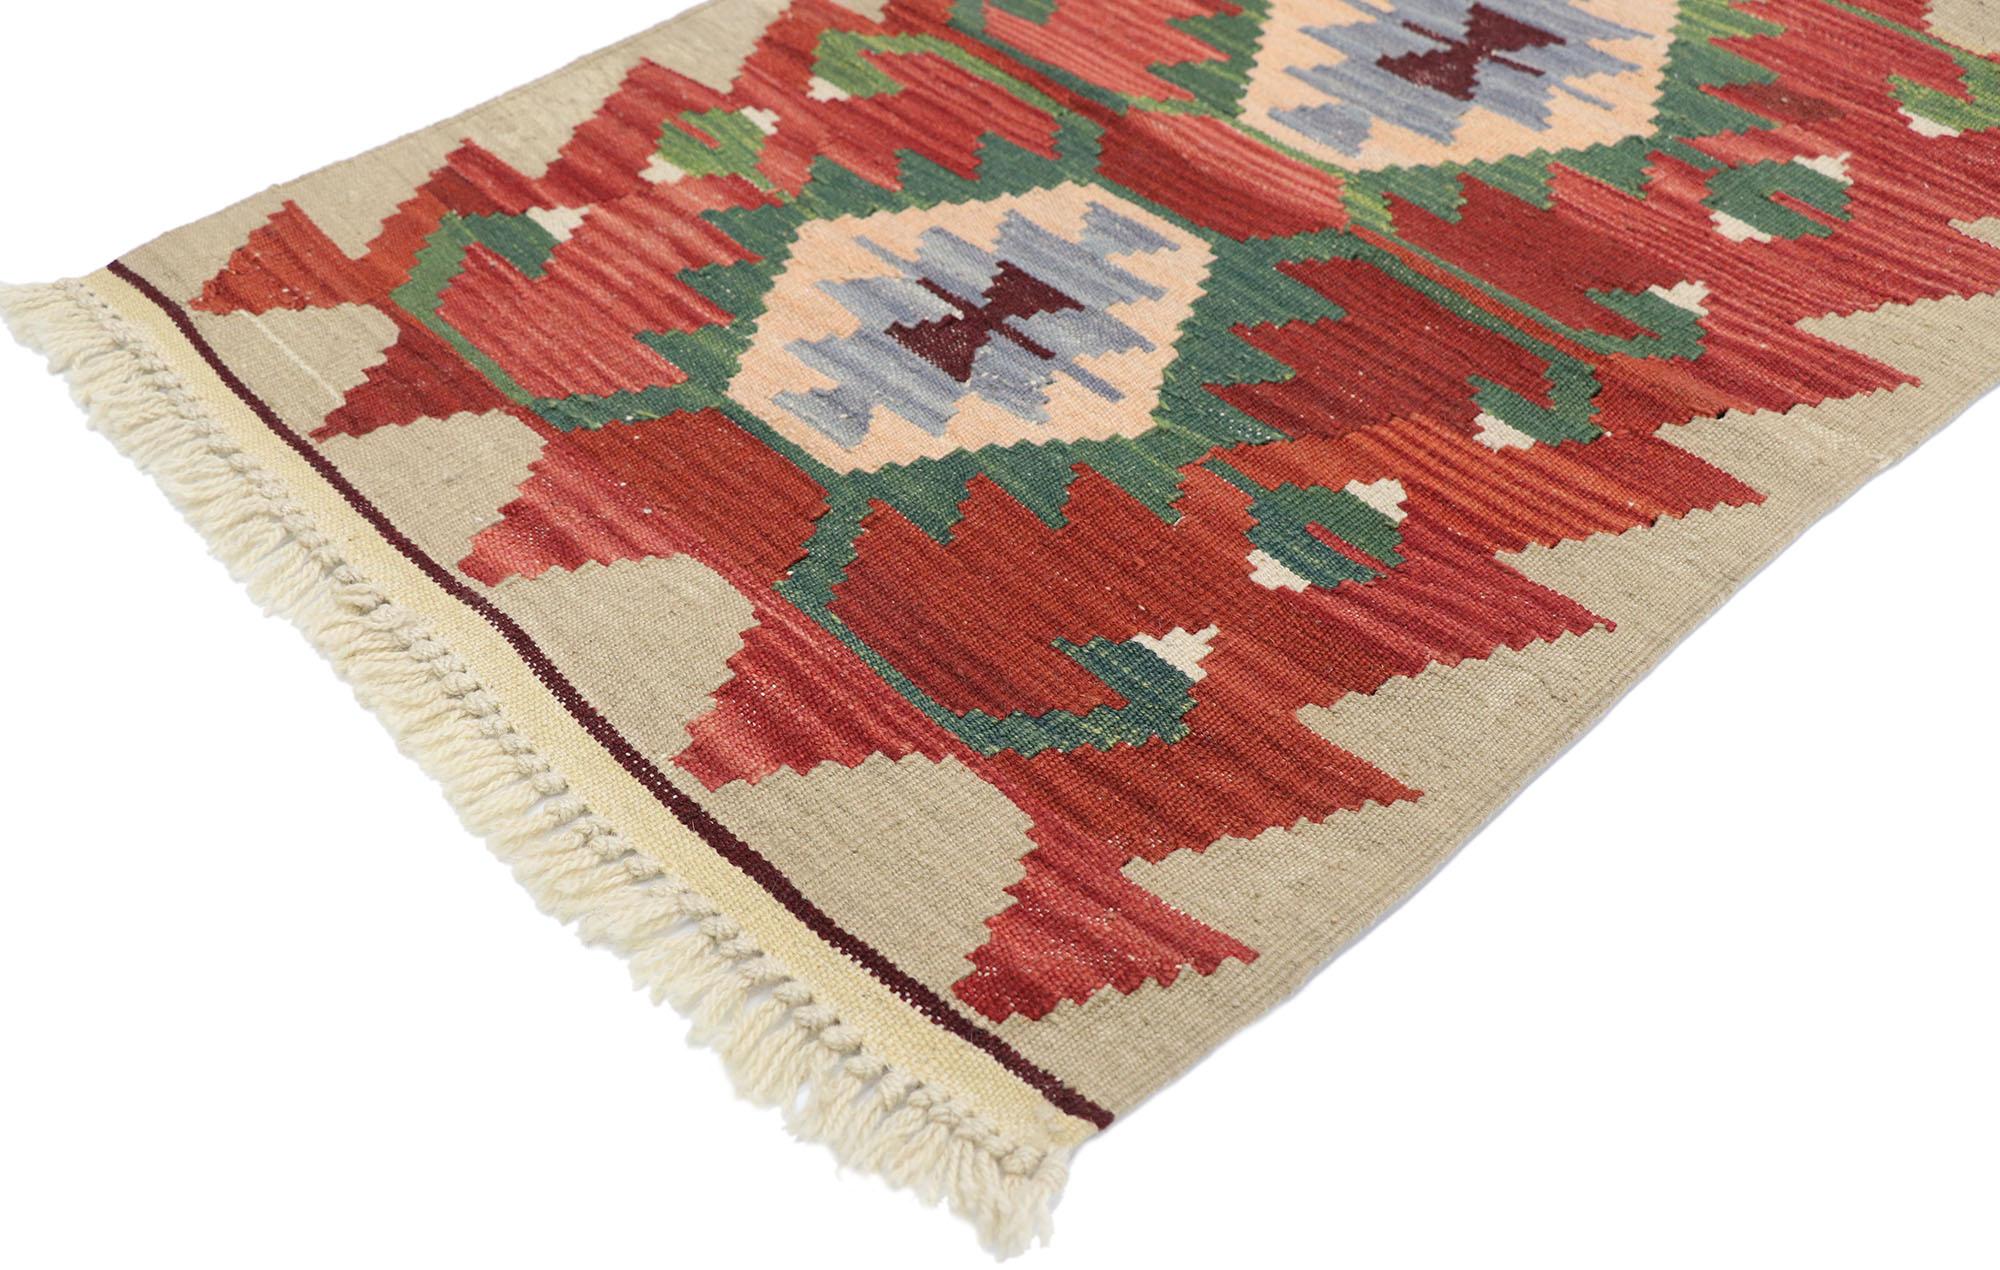 77892, vintage Persian Shiraz Kilim rug with Tribal style. Full of tiny details and a bold expressive design combined with vibrant colors and tribal style, this hand-woven wool vintage Persian Shiraz kilim rug is a captivating vision of woven